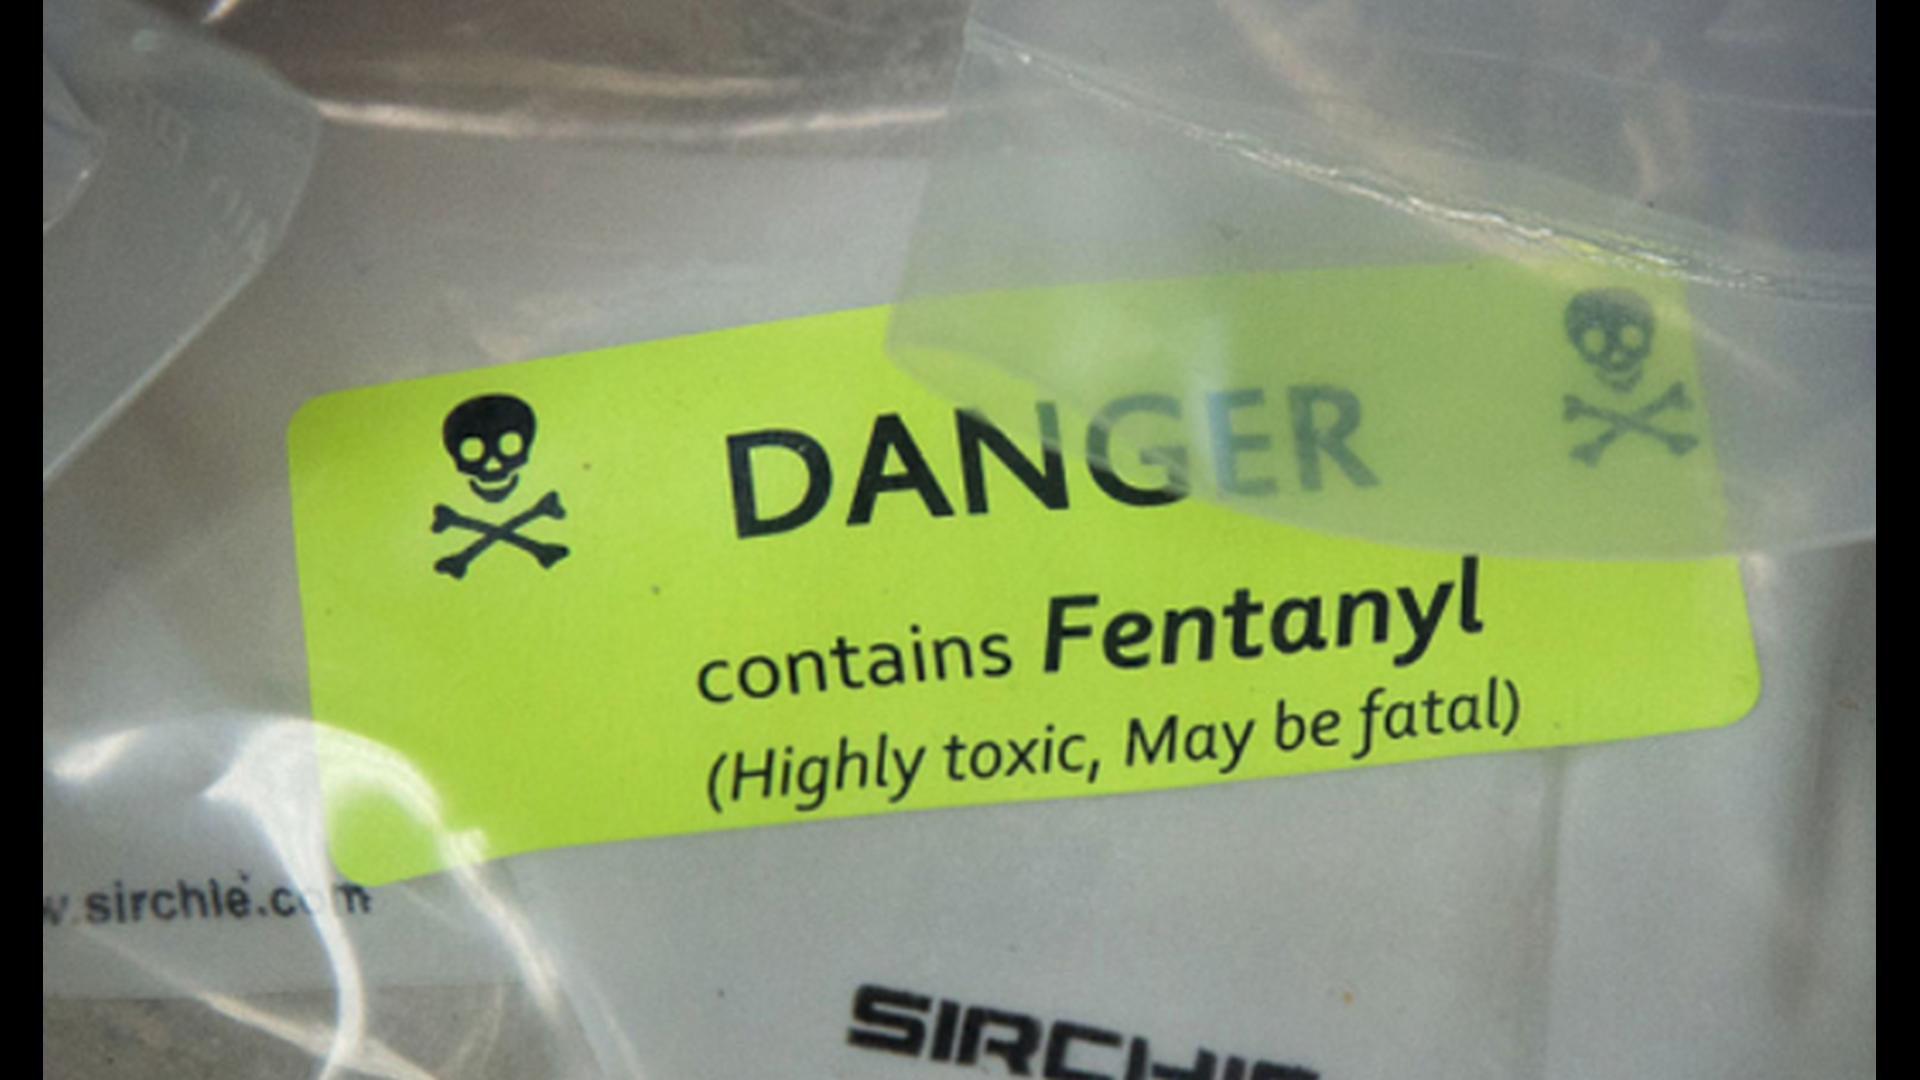 A new study shows that fentanyl deaths among children are rising faster than any other group.